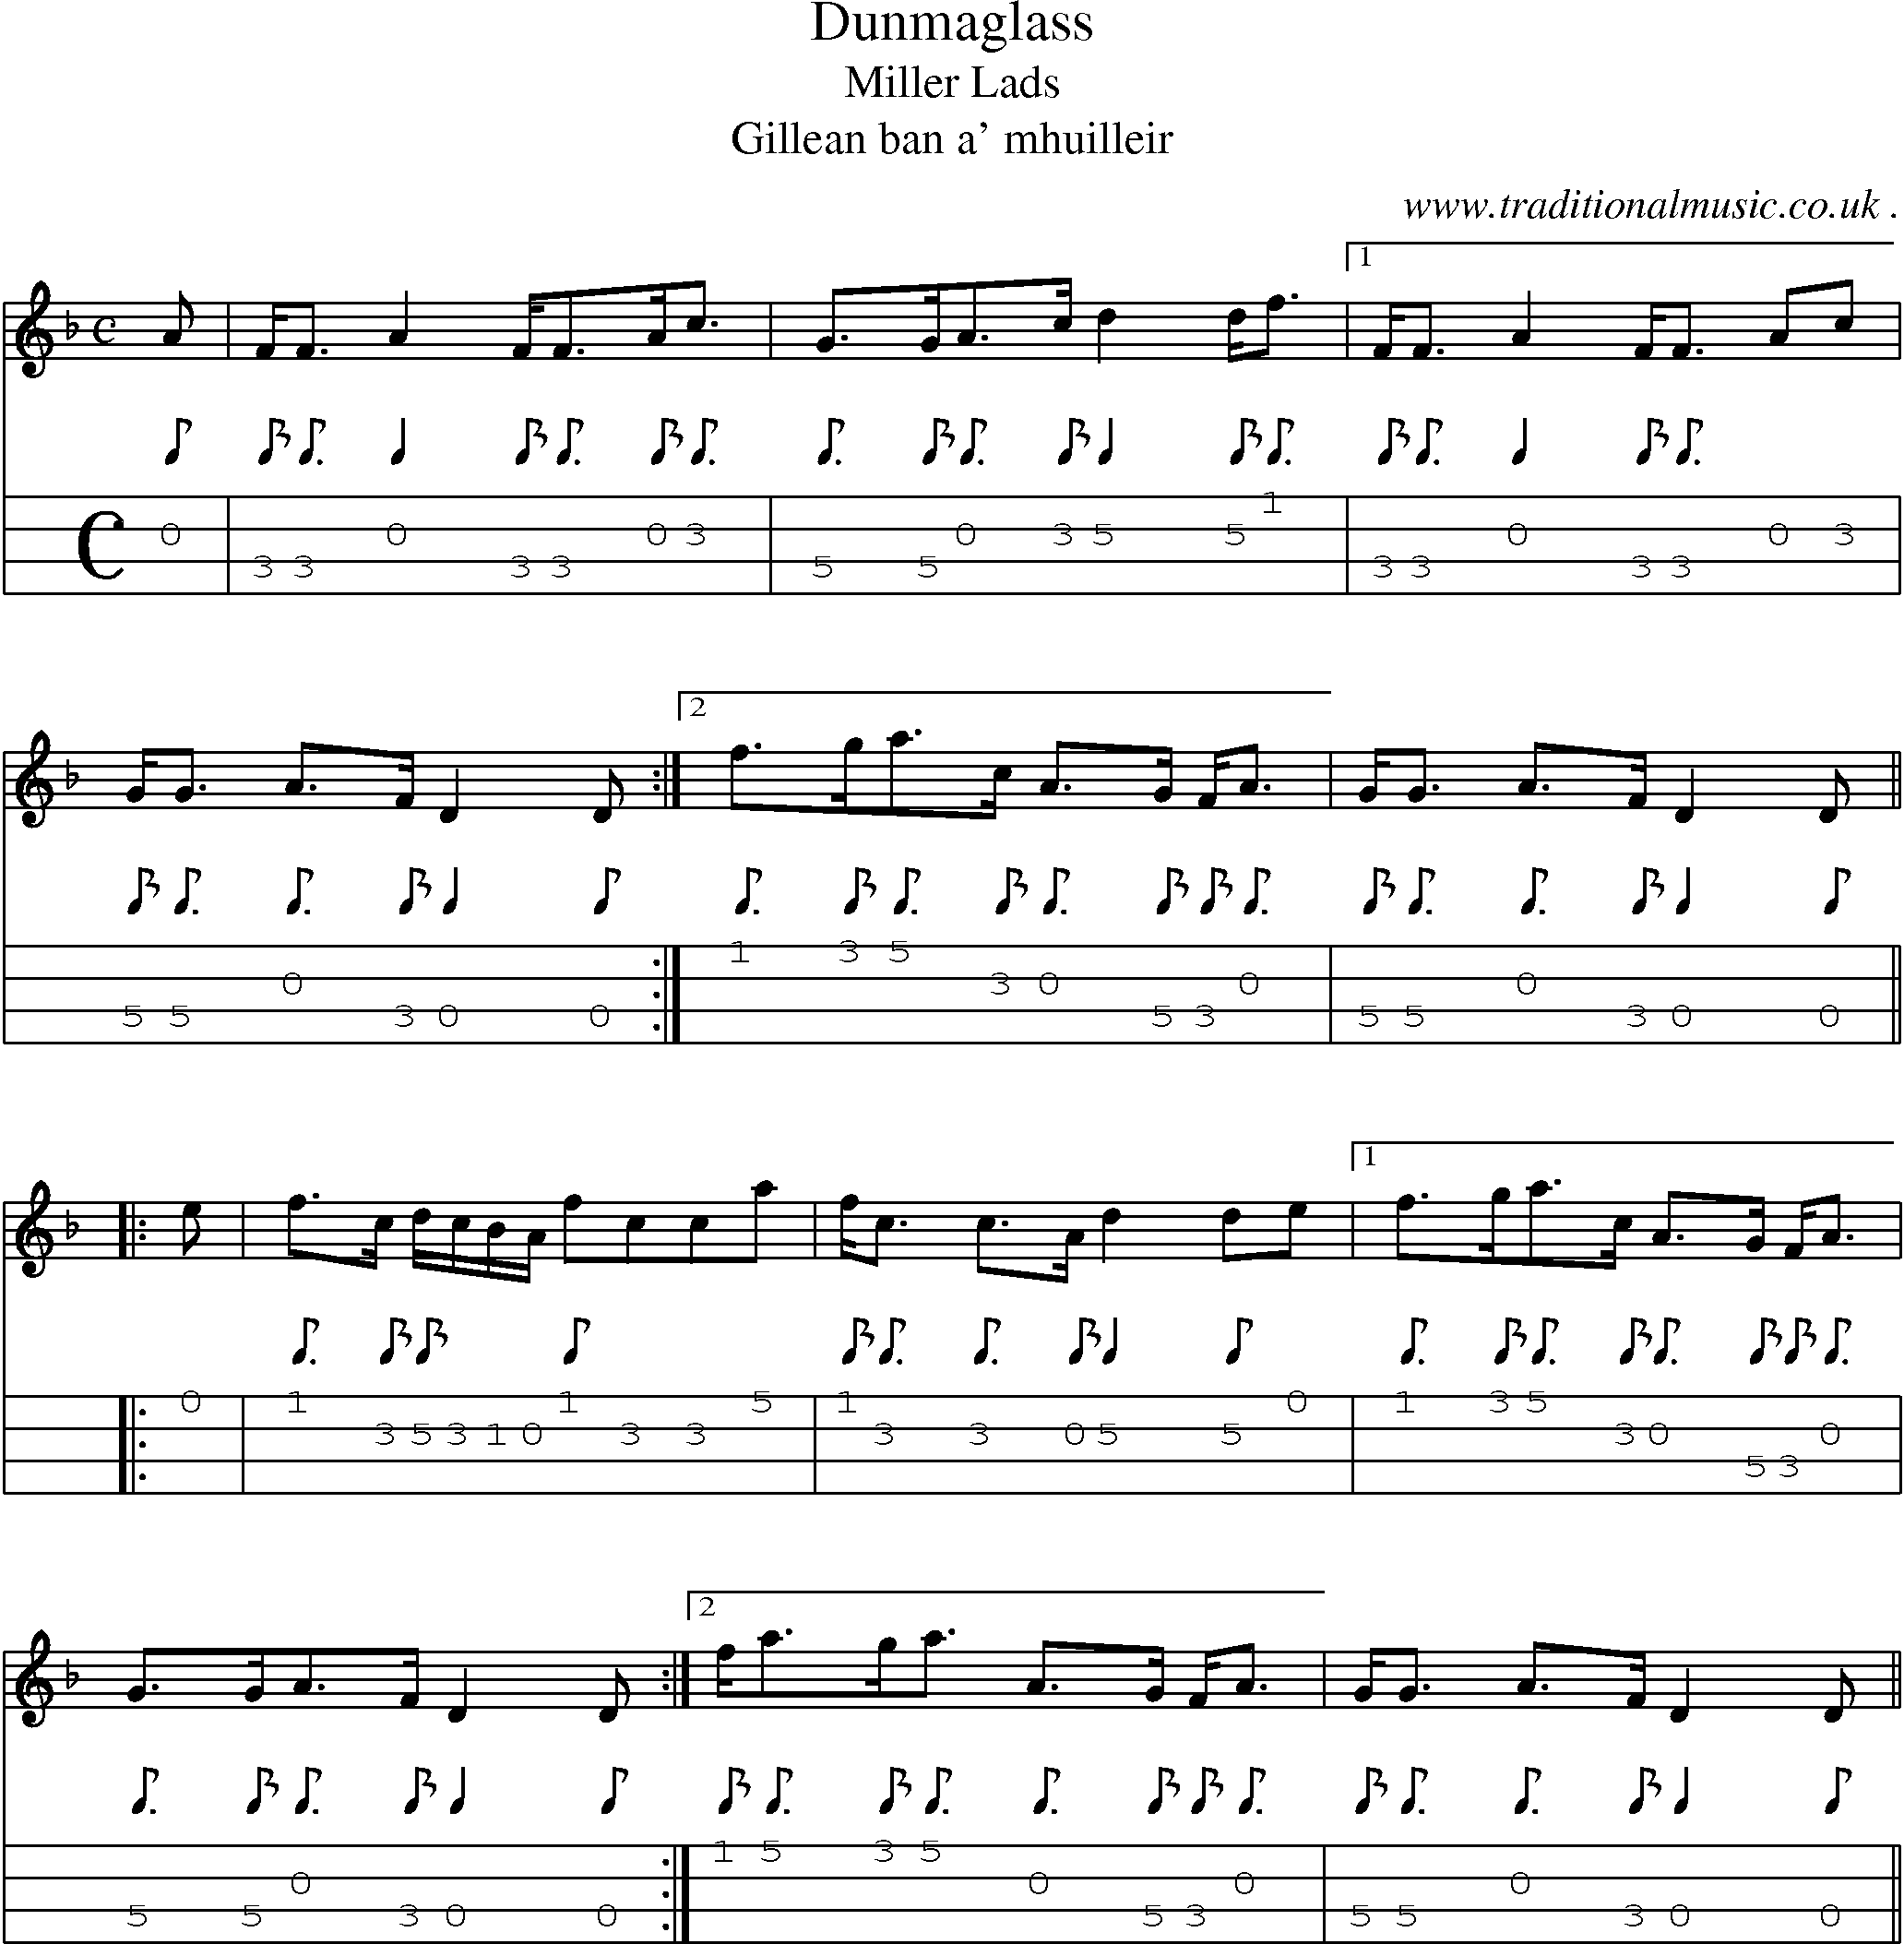 Sheet-music  score, Chords and Mandolin Tabs for Dunmaglass